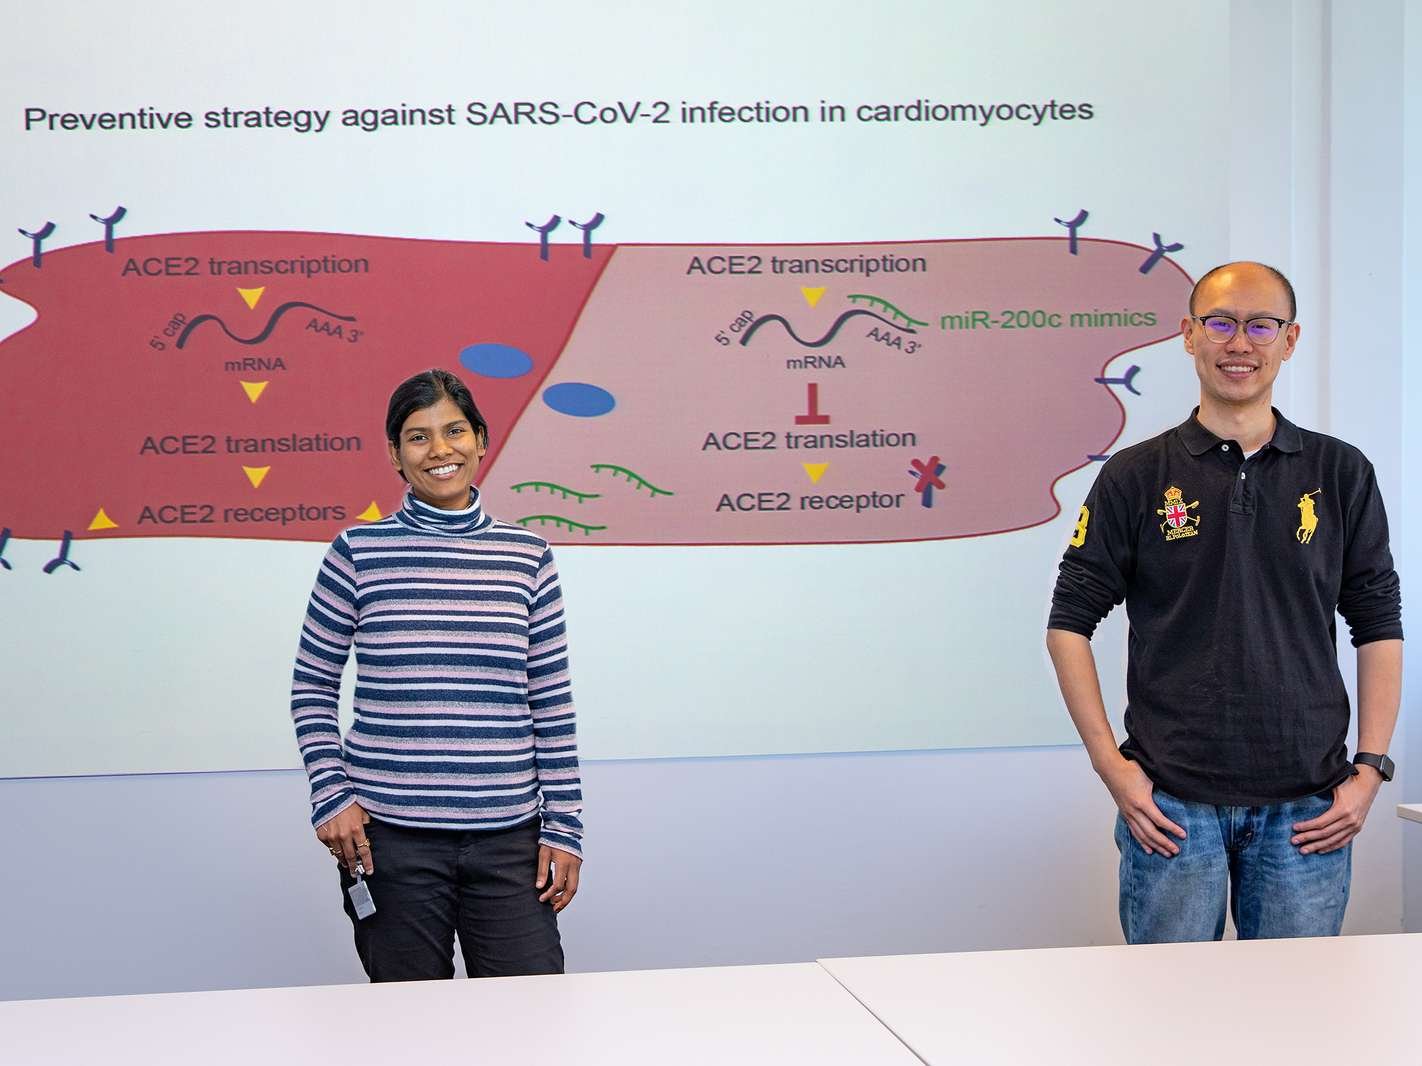 Shambhabi Chatterjee, PhD, (left) and Dongchao Lu in front of the schematic illustration of the blockage of the pathway for the coronavirus to enter the heart muscle. Copyright: Karin Kaiser/MHH